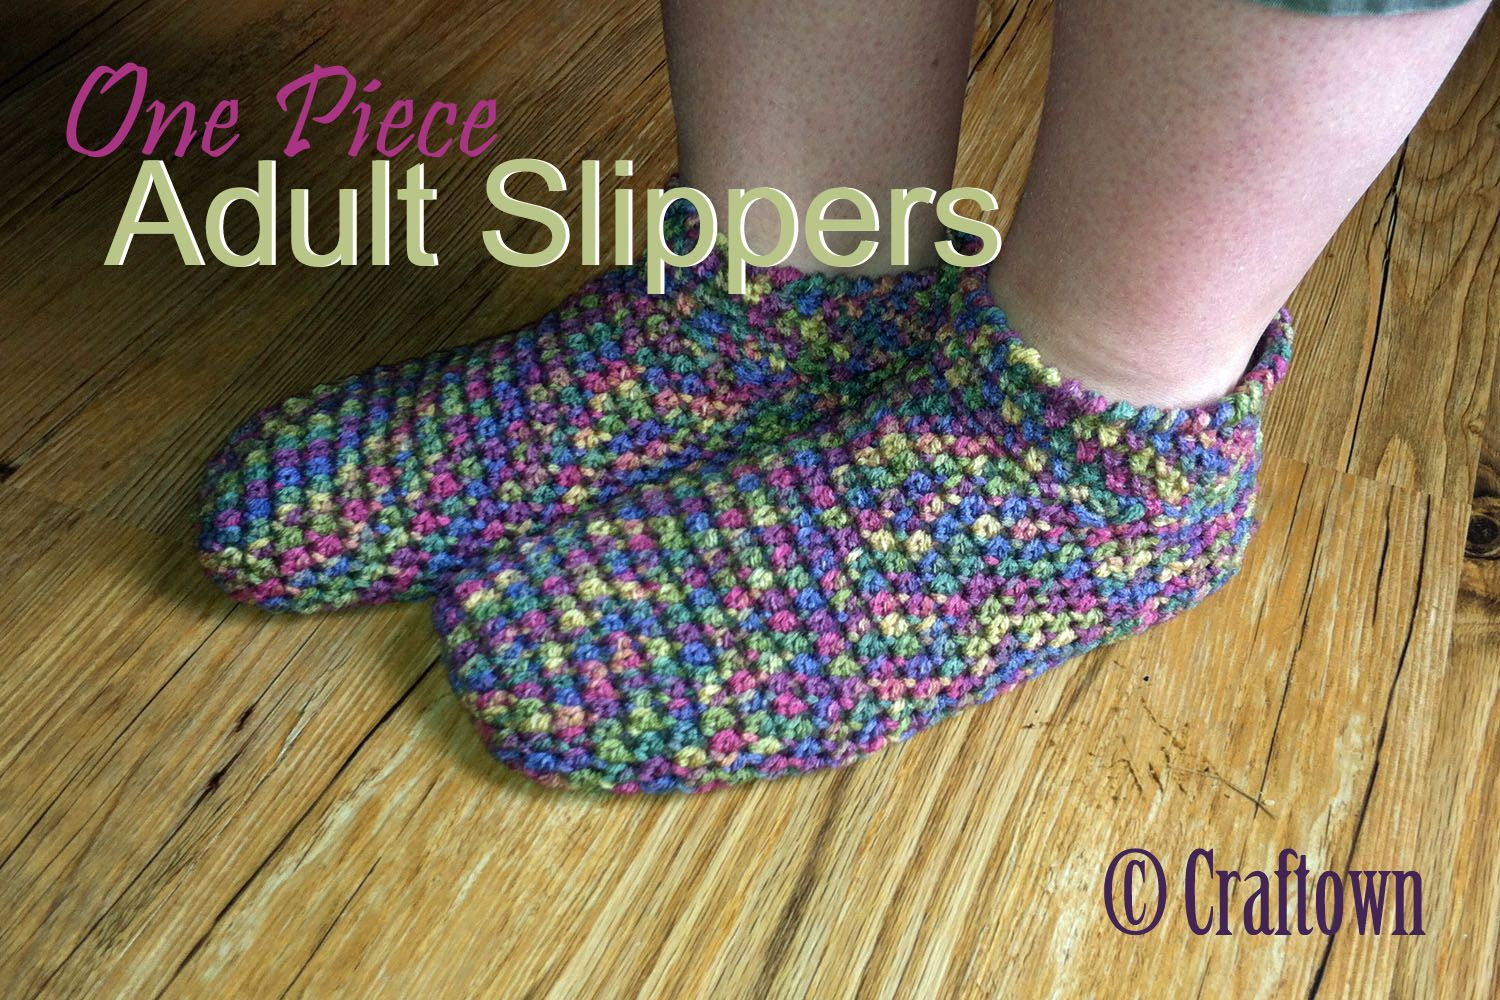 Crochet Bootie Pattern For Adults Free Crochet Pattern For Adult One Piece Slippers At Craftown We